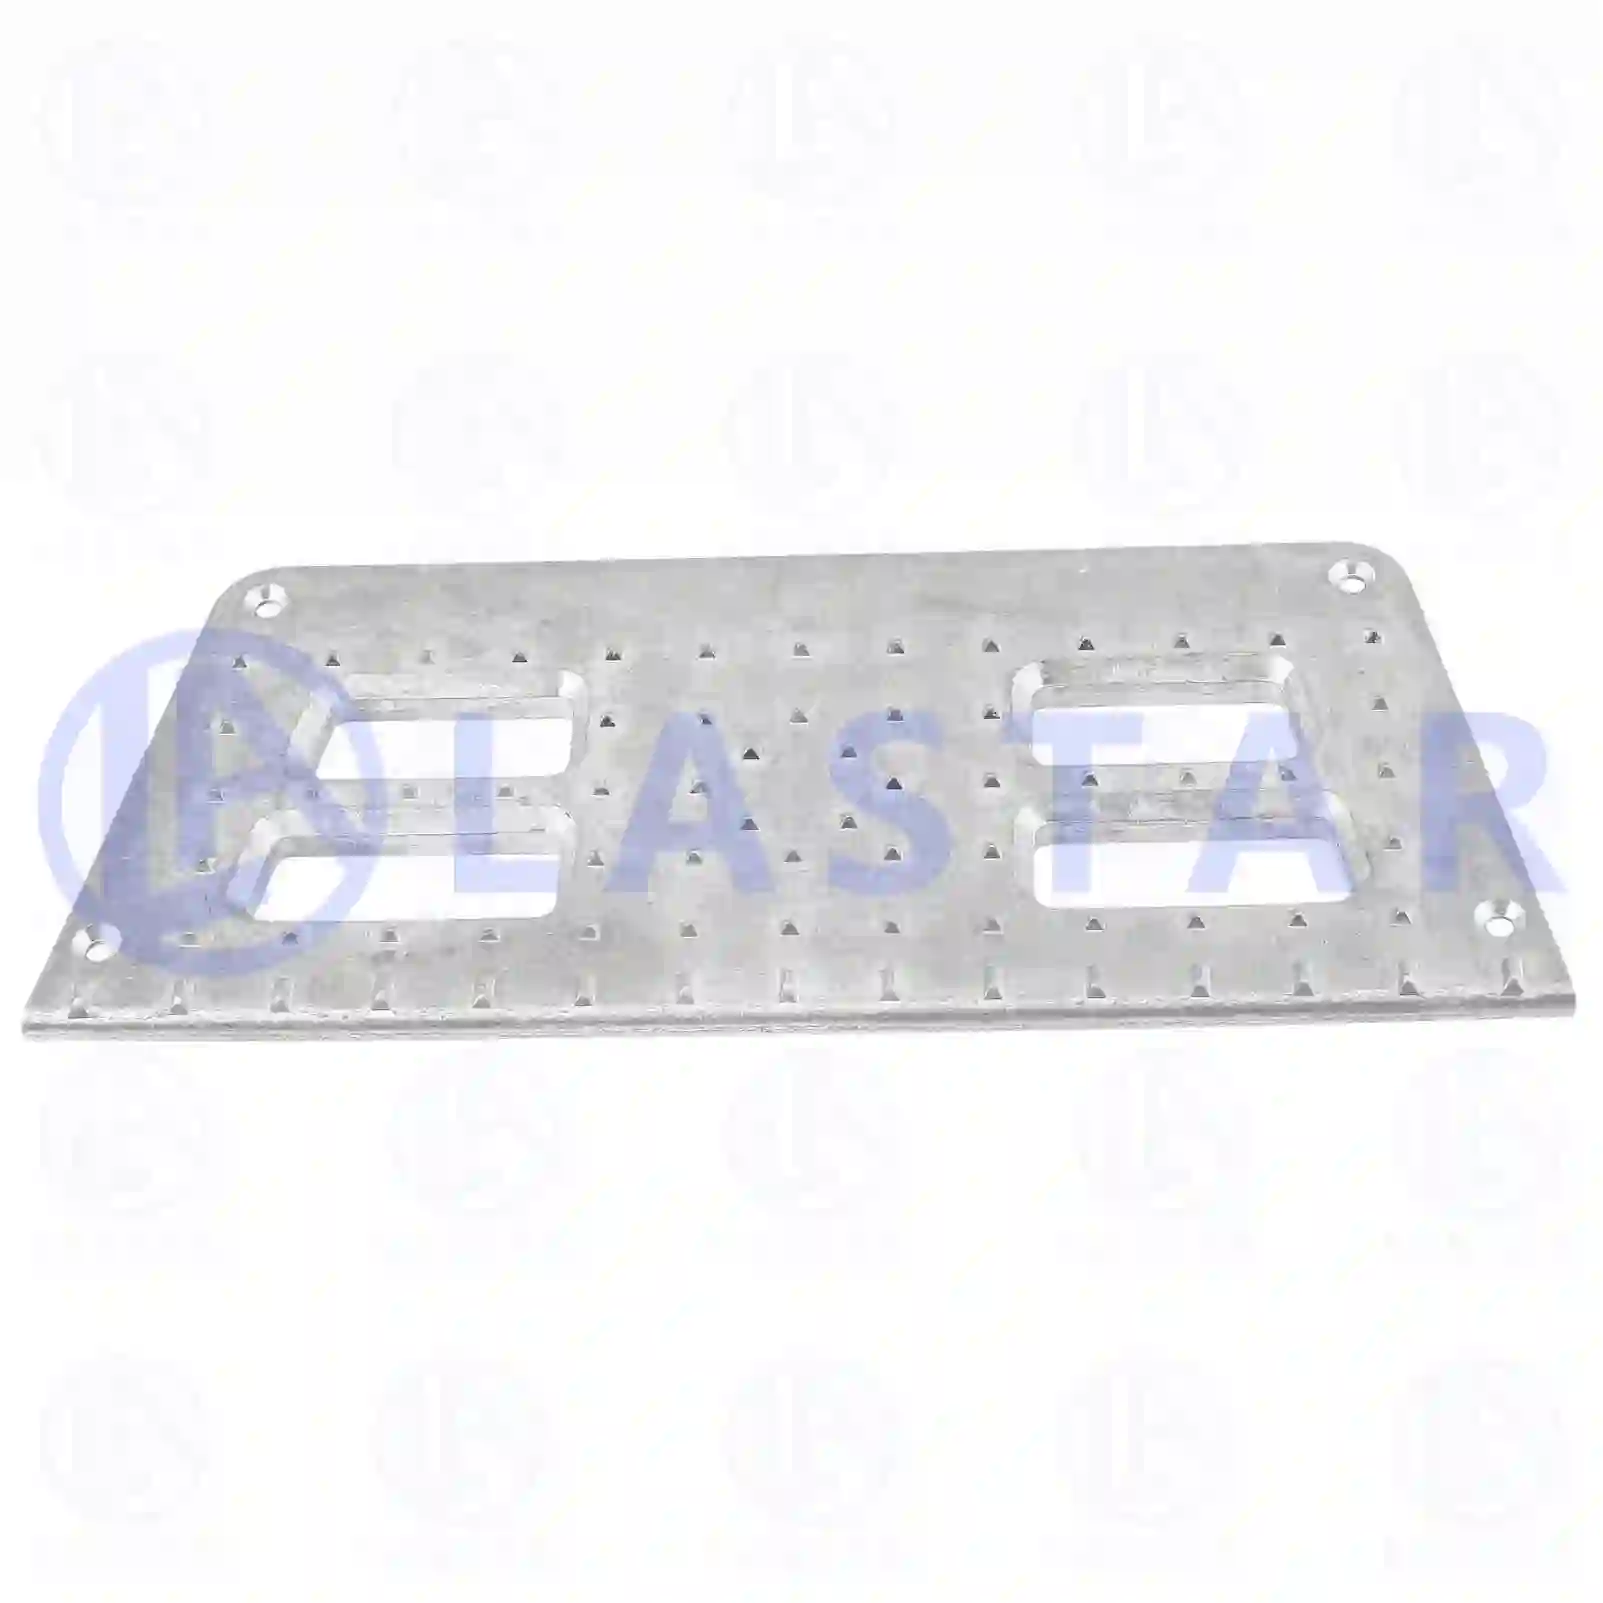 Step, 77717922, 750899, 750899 ||  77717922 Lastar Spare Part | Truck Spare Parts, Auotomotive Spare Parts Step, 77717922, 750899, 750899 ||  77717922 Lastar Spare Part | Truck Spare Parts, Auotomotive Spare Parts